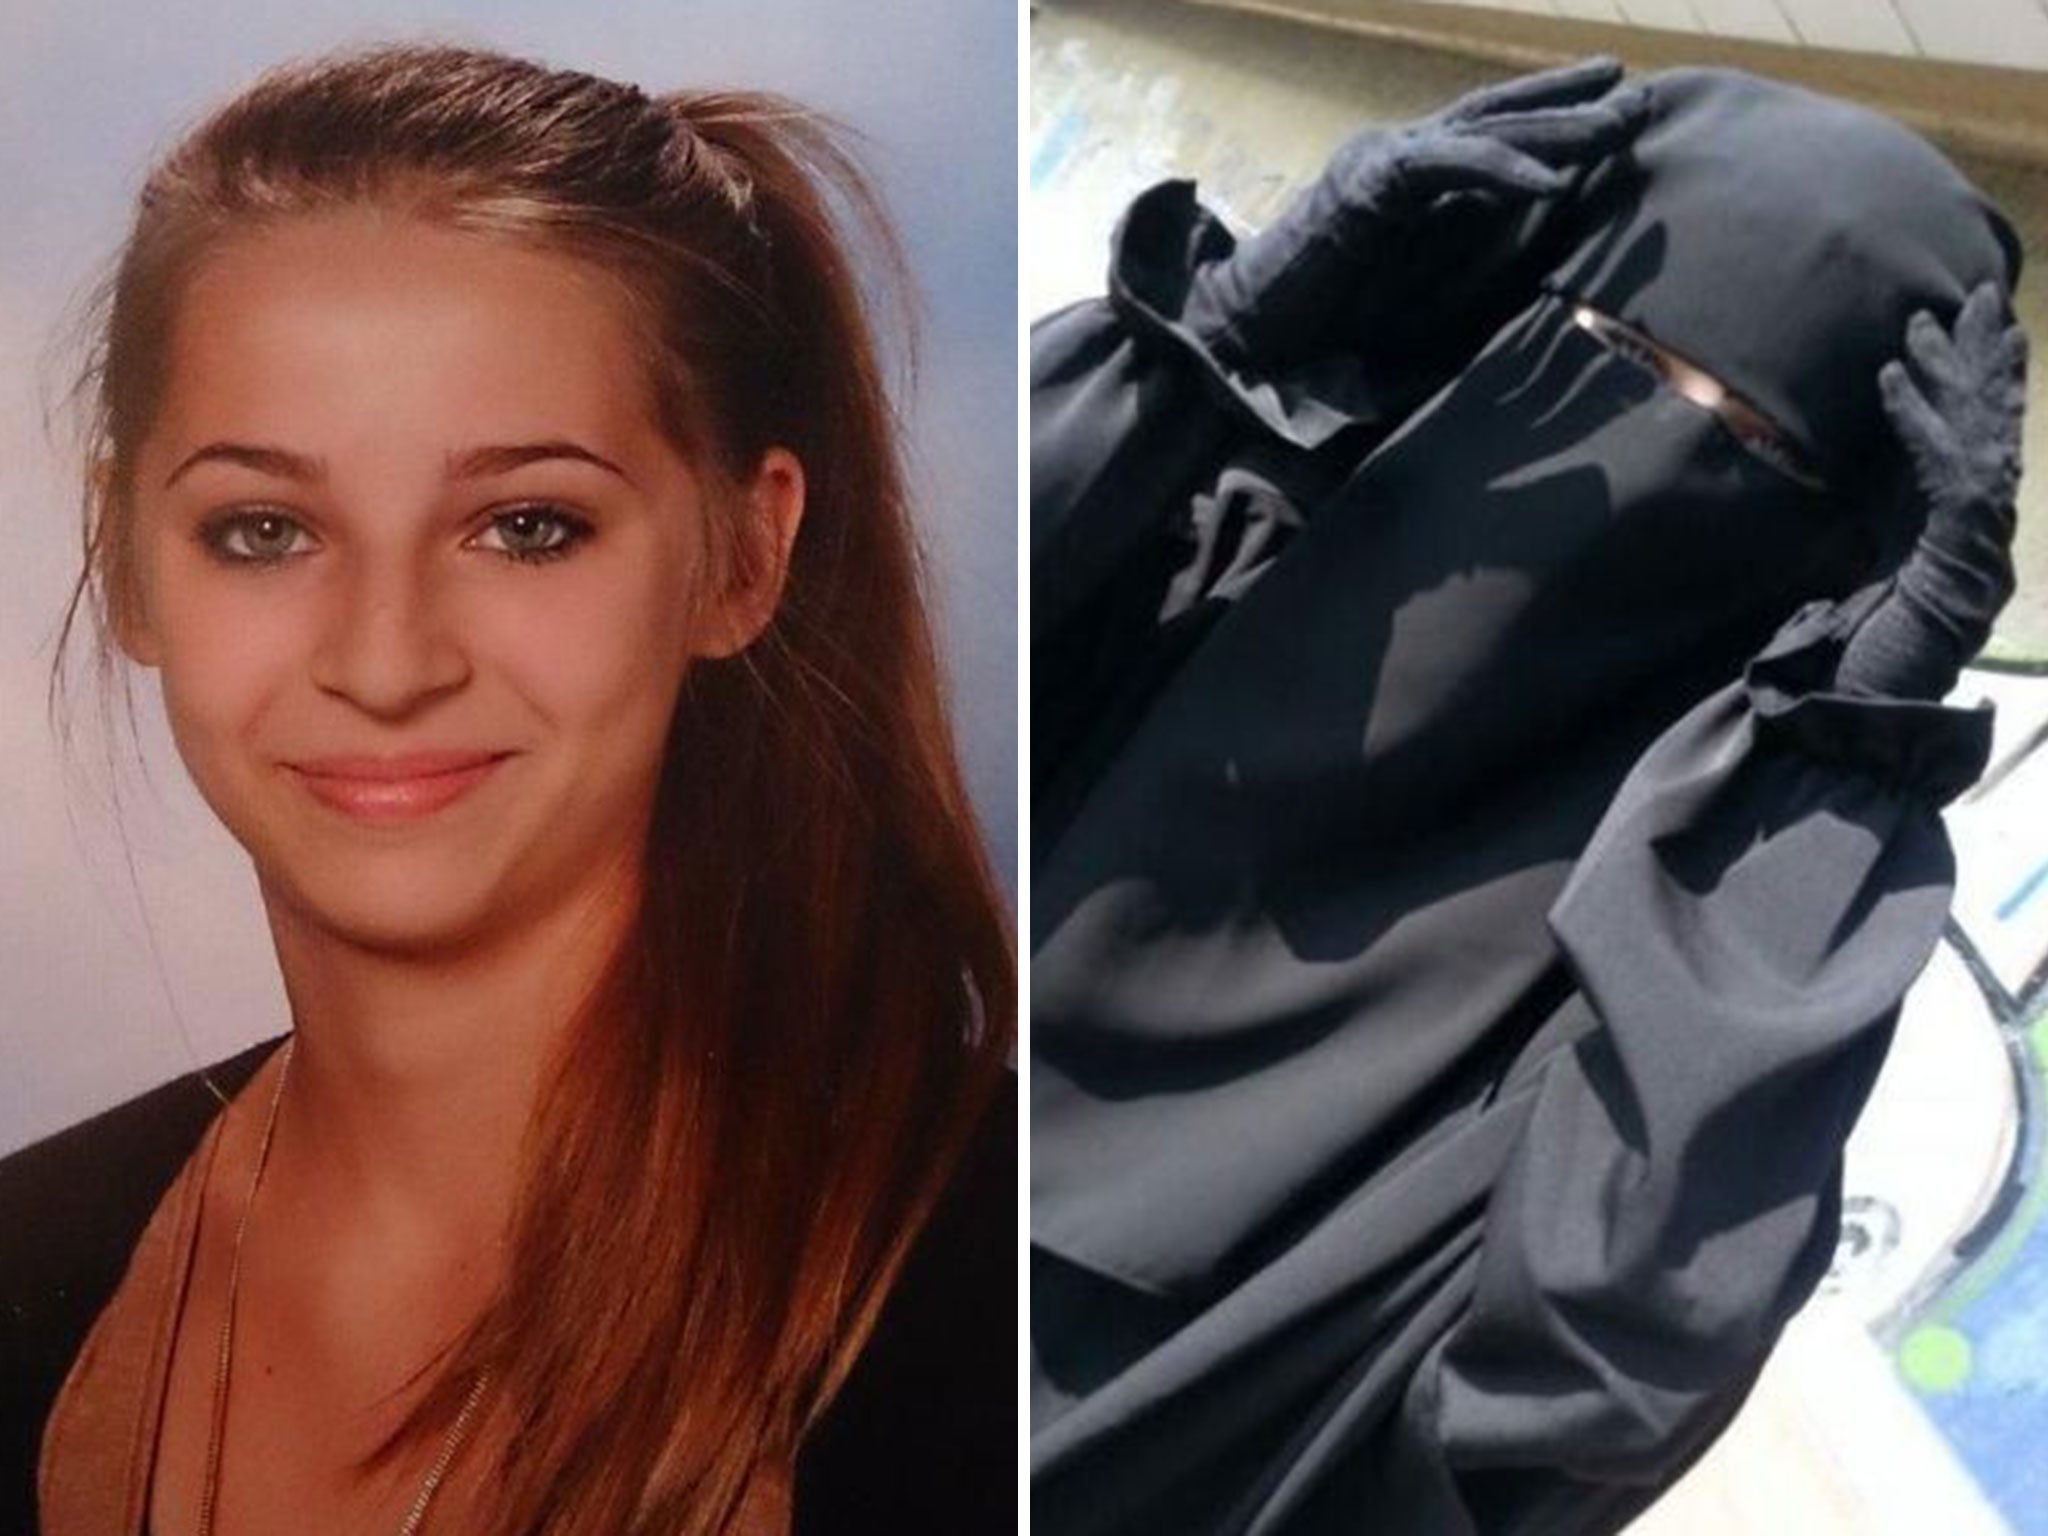 Samra Kesinovic, 17, pictured before her departure for Syria, and after, in a burka